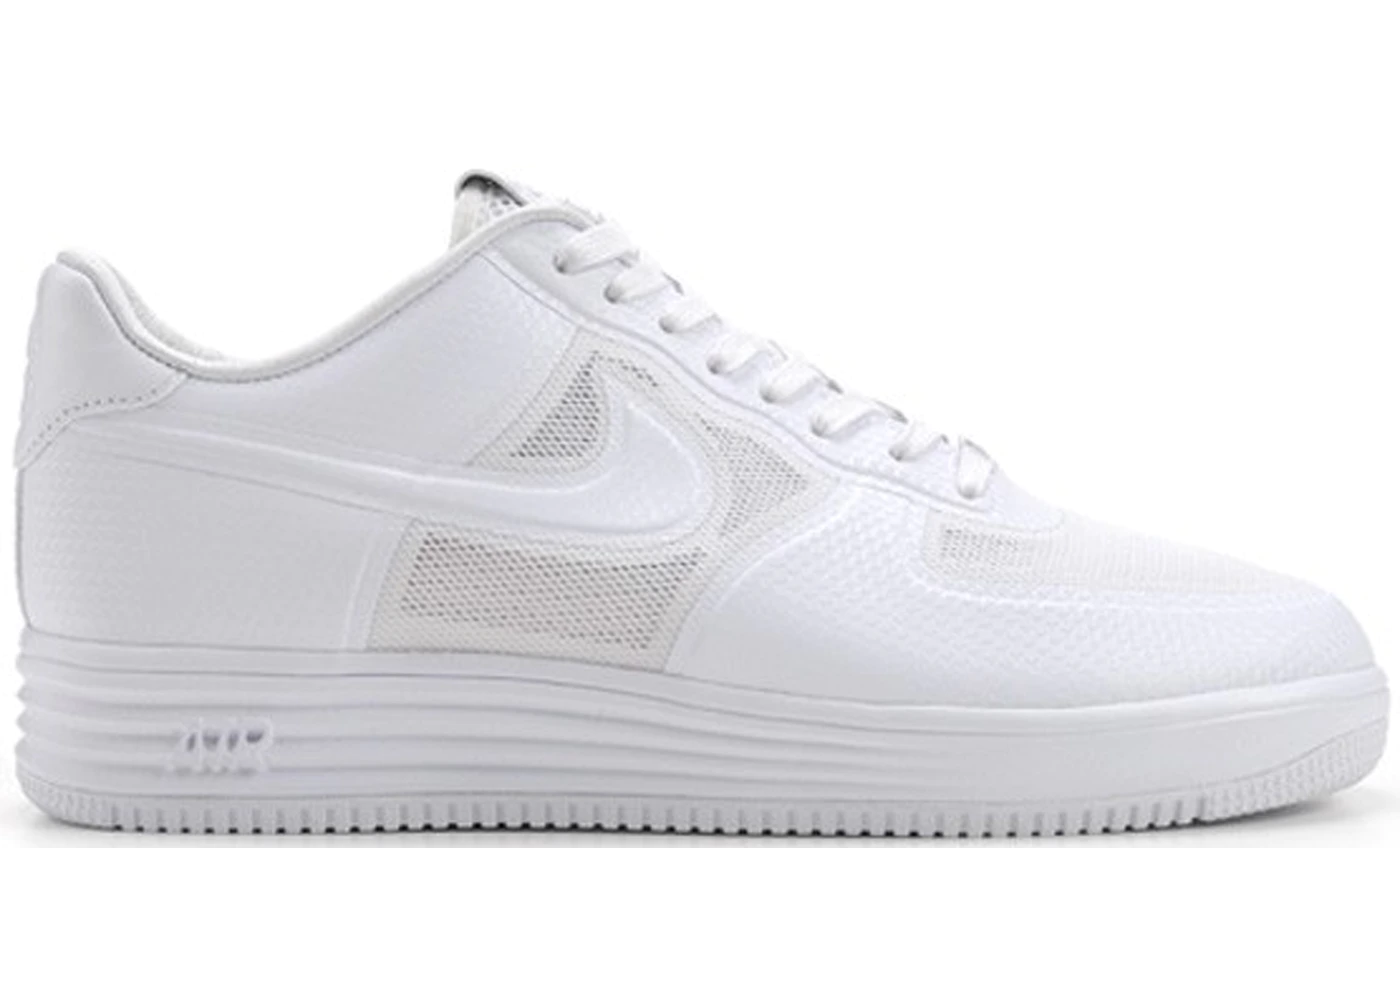 Nike Lunar Force 1 Fuse 30th Anniversary White Men's - 573980-100 - US